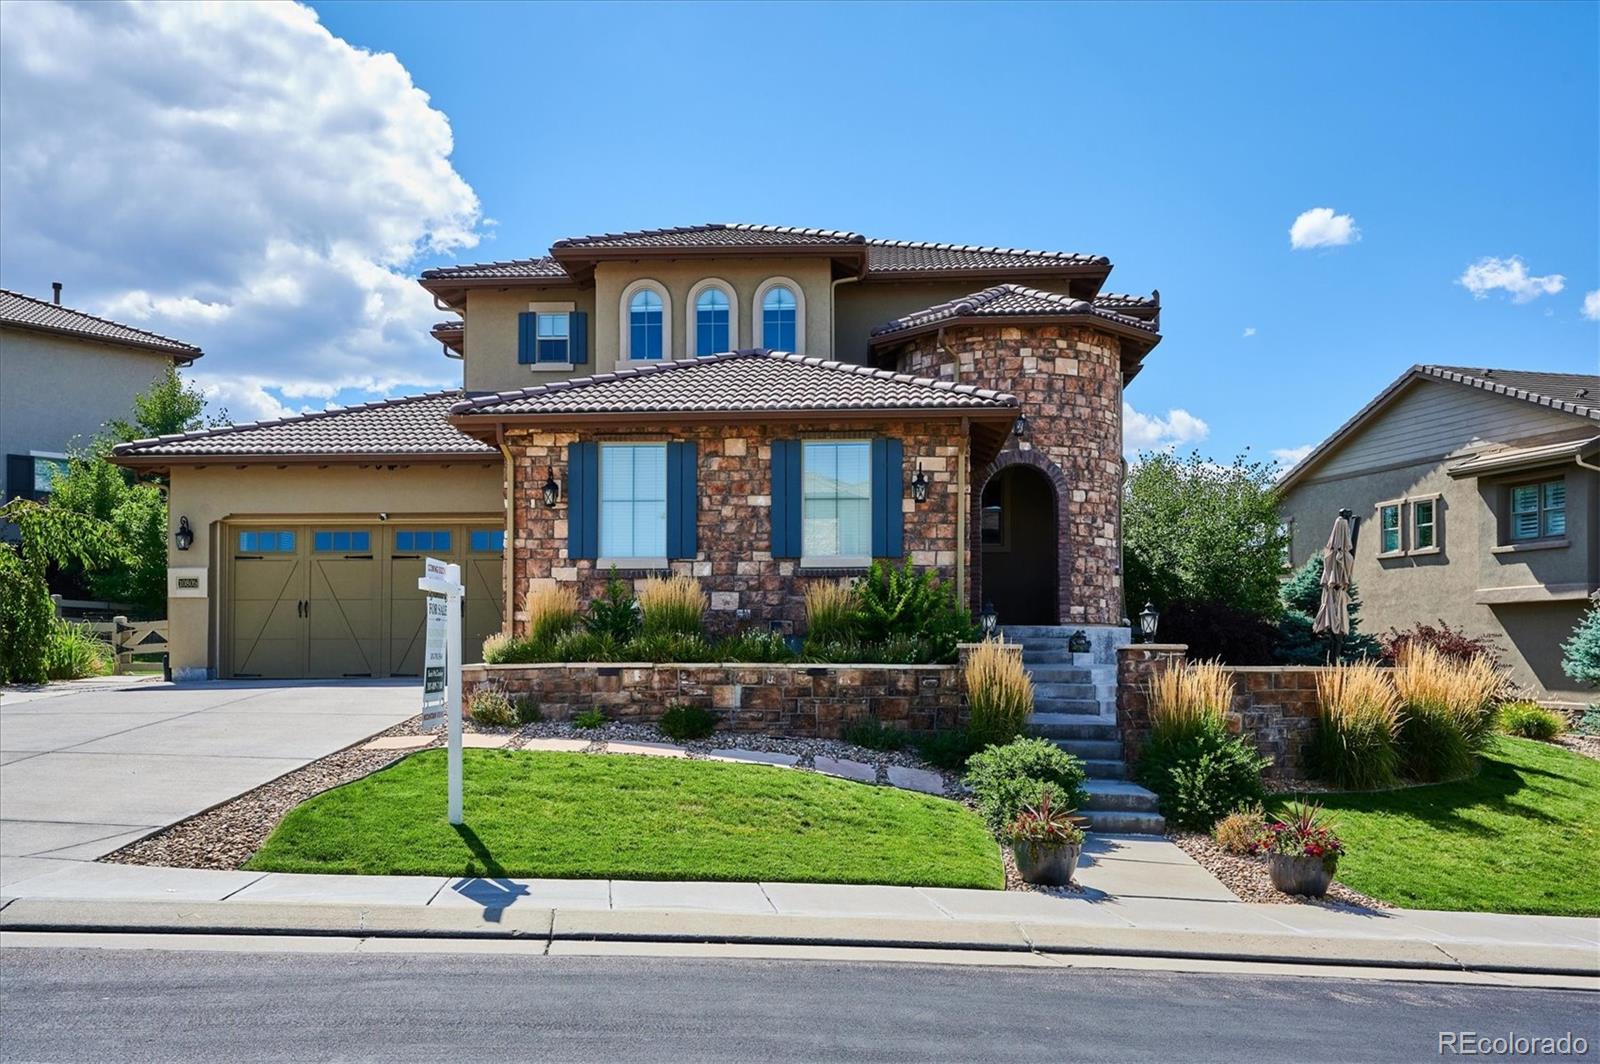 Report Image for 10805  Manorstone Drive,Highlands Ranch, Colorado